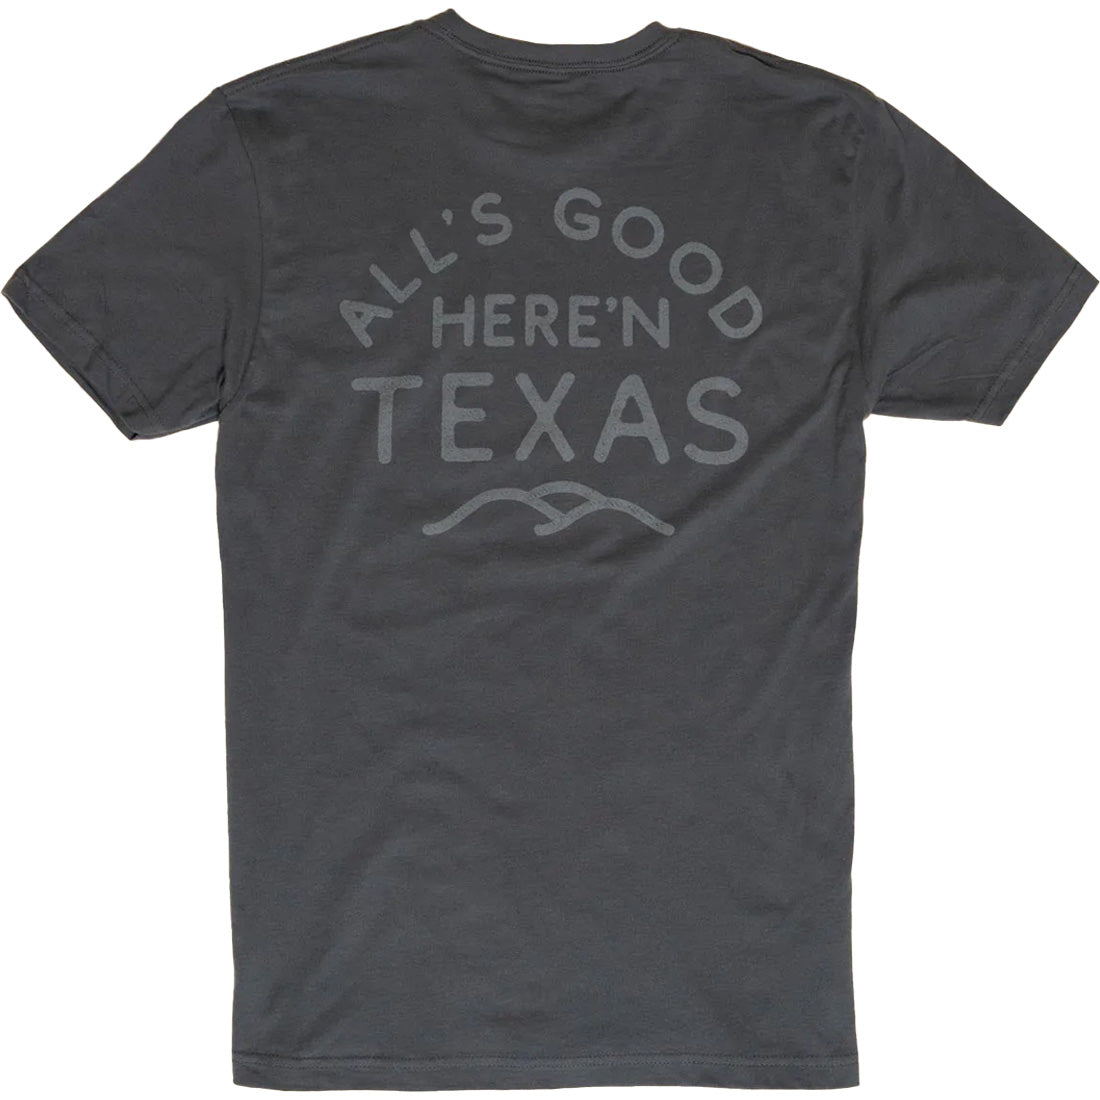 THC Provisions All's Good Tee